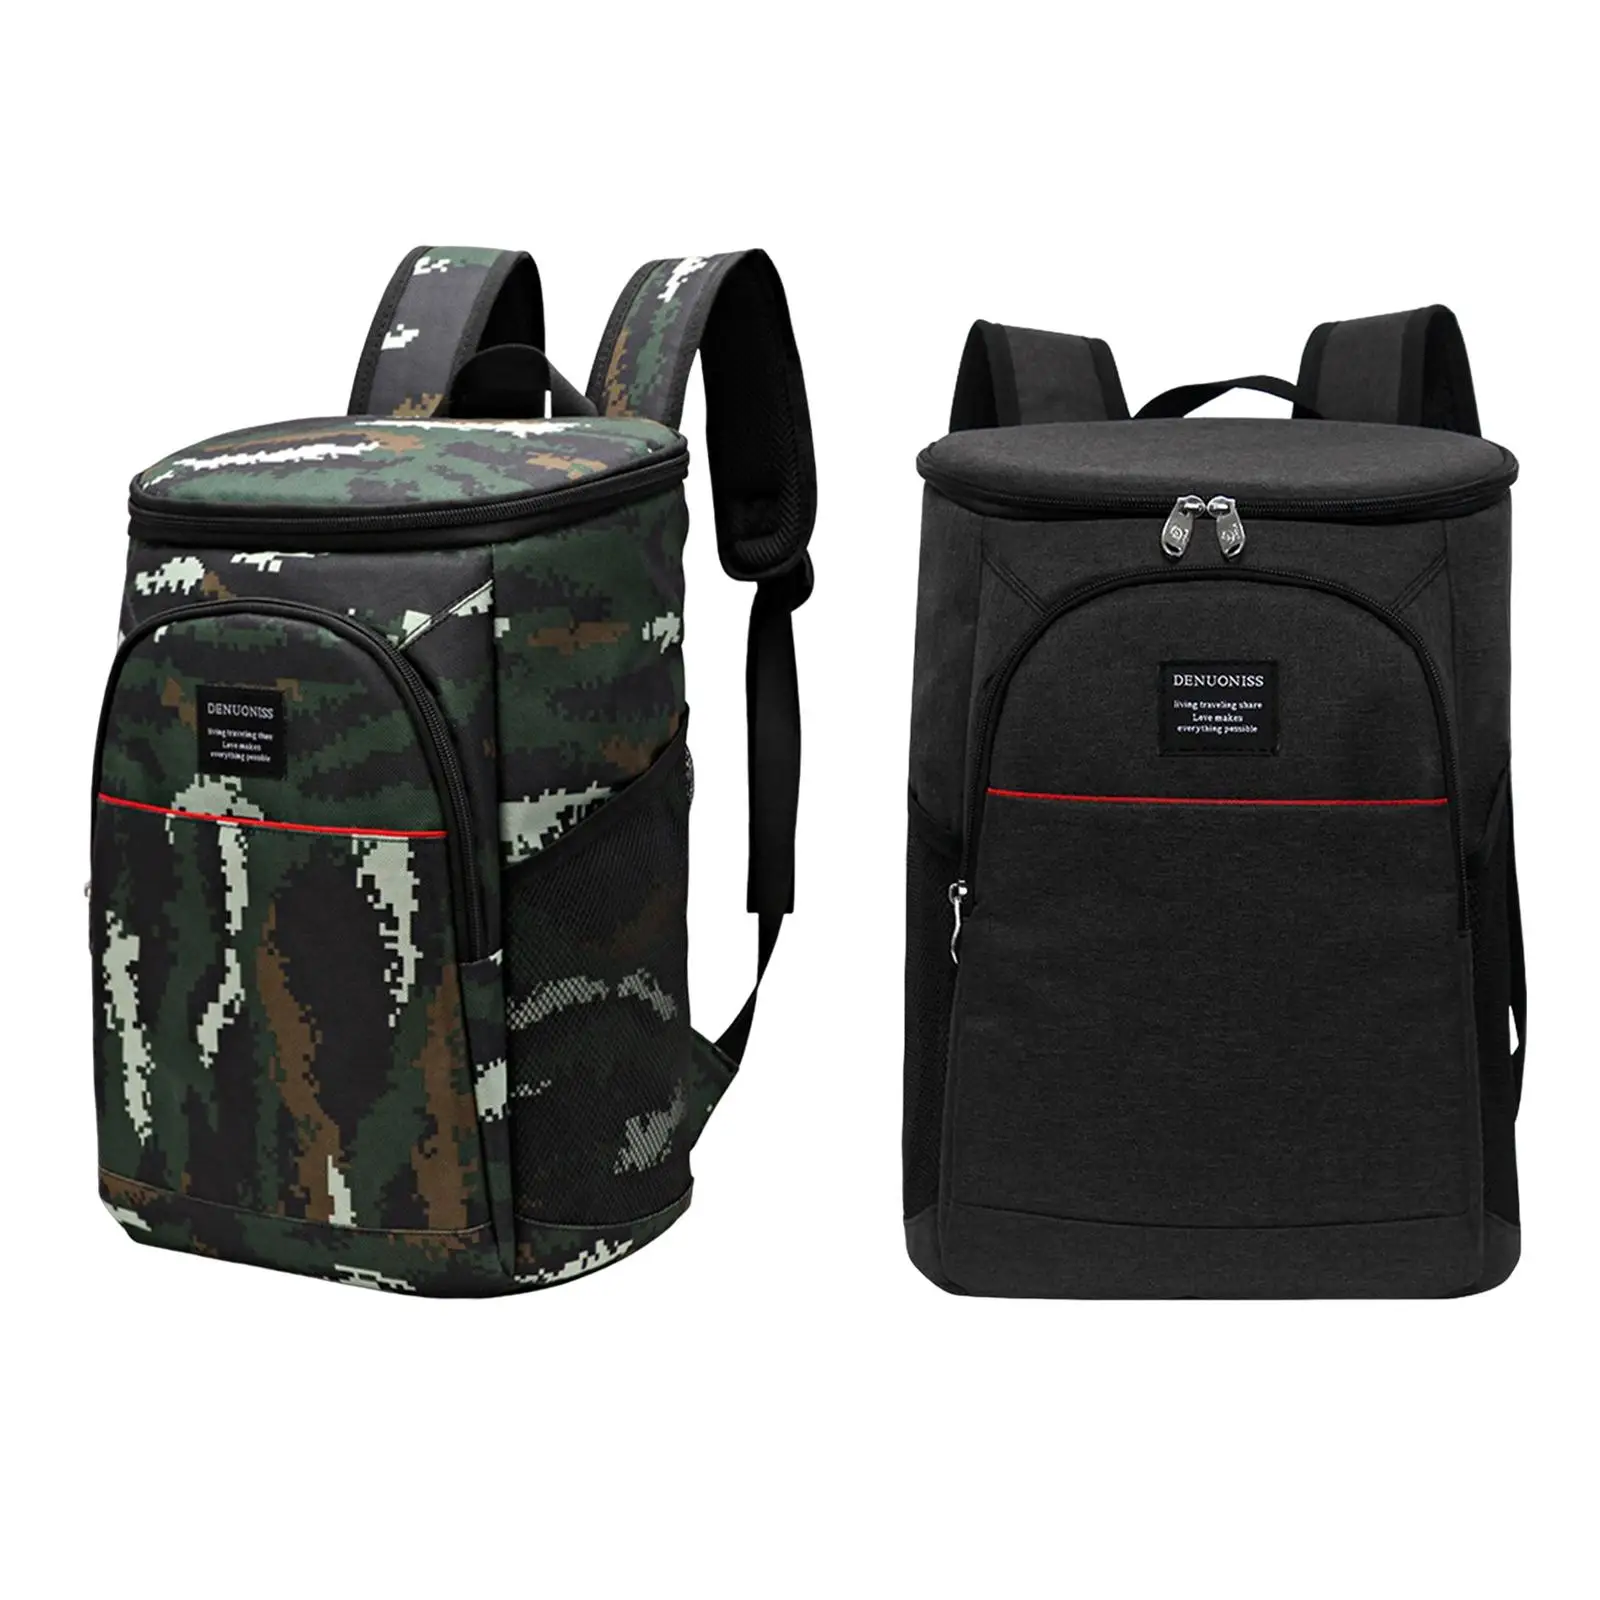 Backpack Cooler Thermal Bag for Cold and Hot Food for Travel Hiking Beach